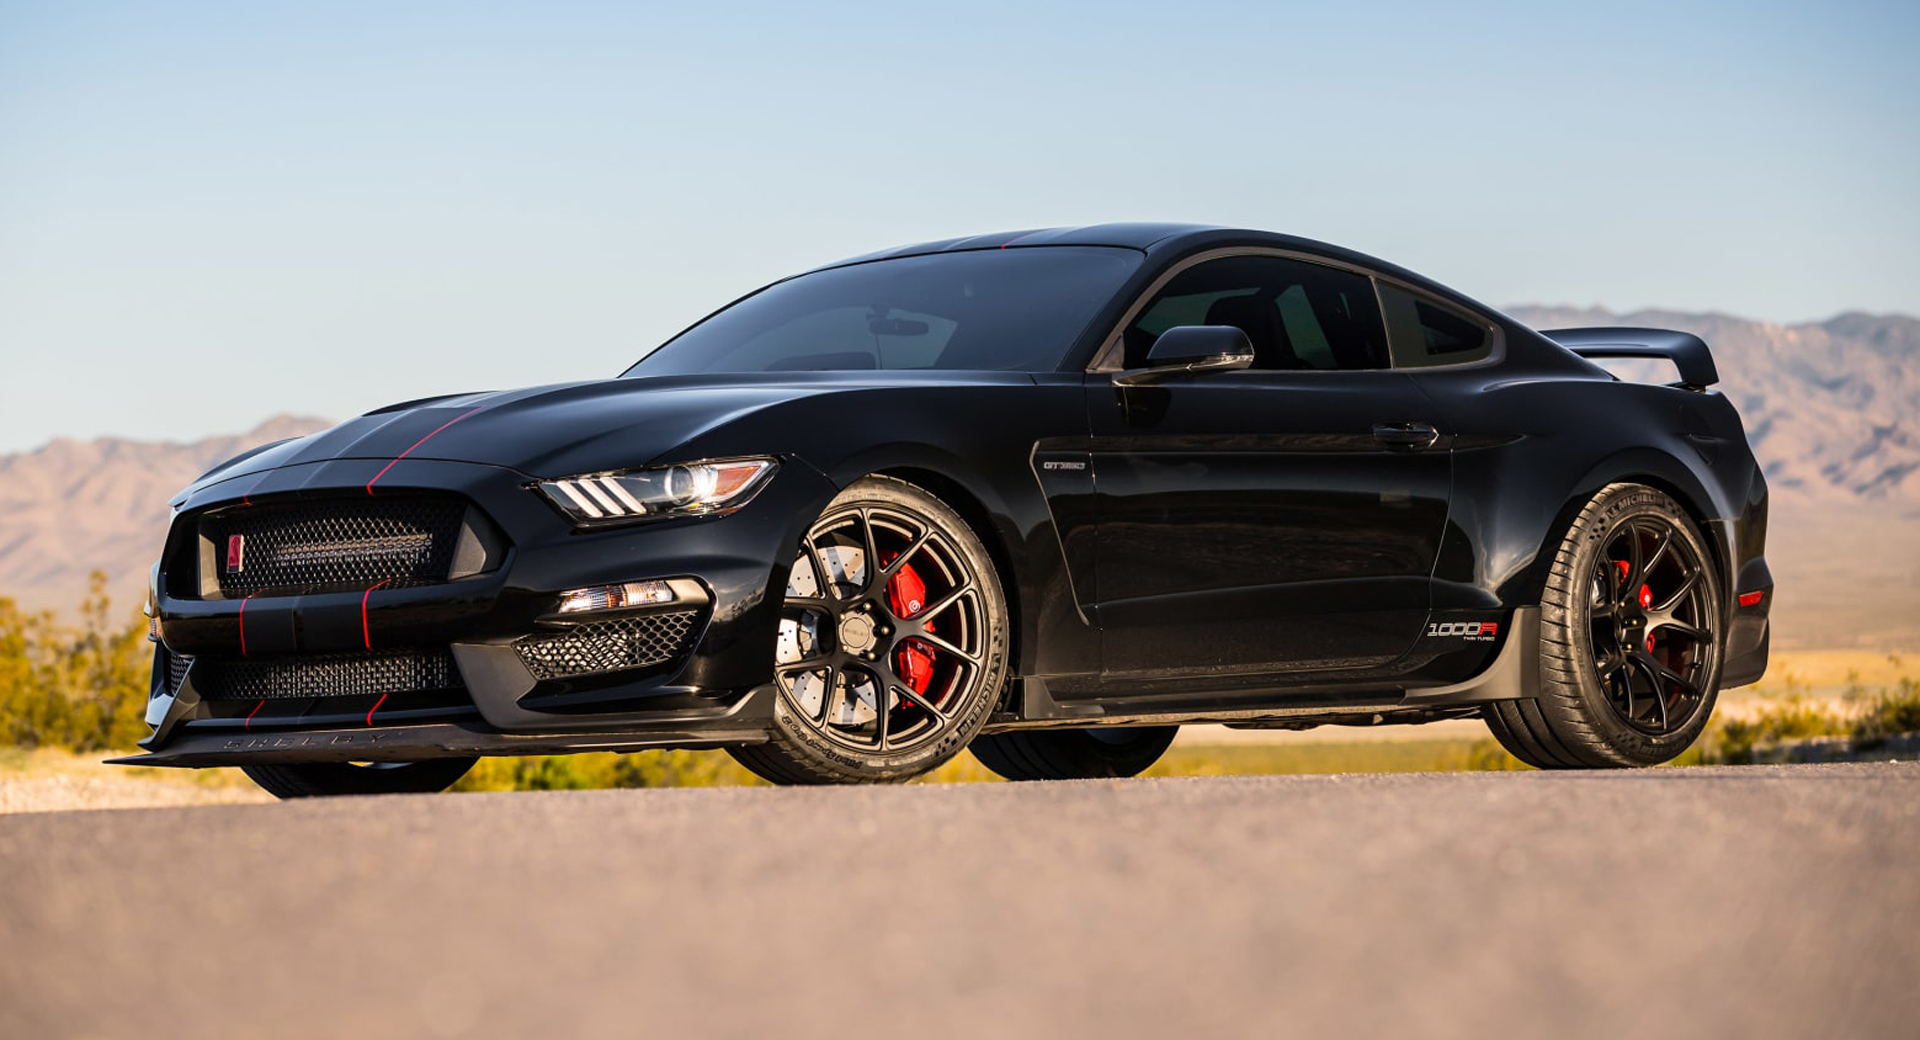 Fathouse's Twin-Turbo Ford Mustang Shelby GT350 Is No Joke With Up To 1400  HP | Carscoops